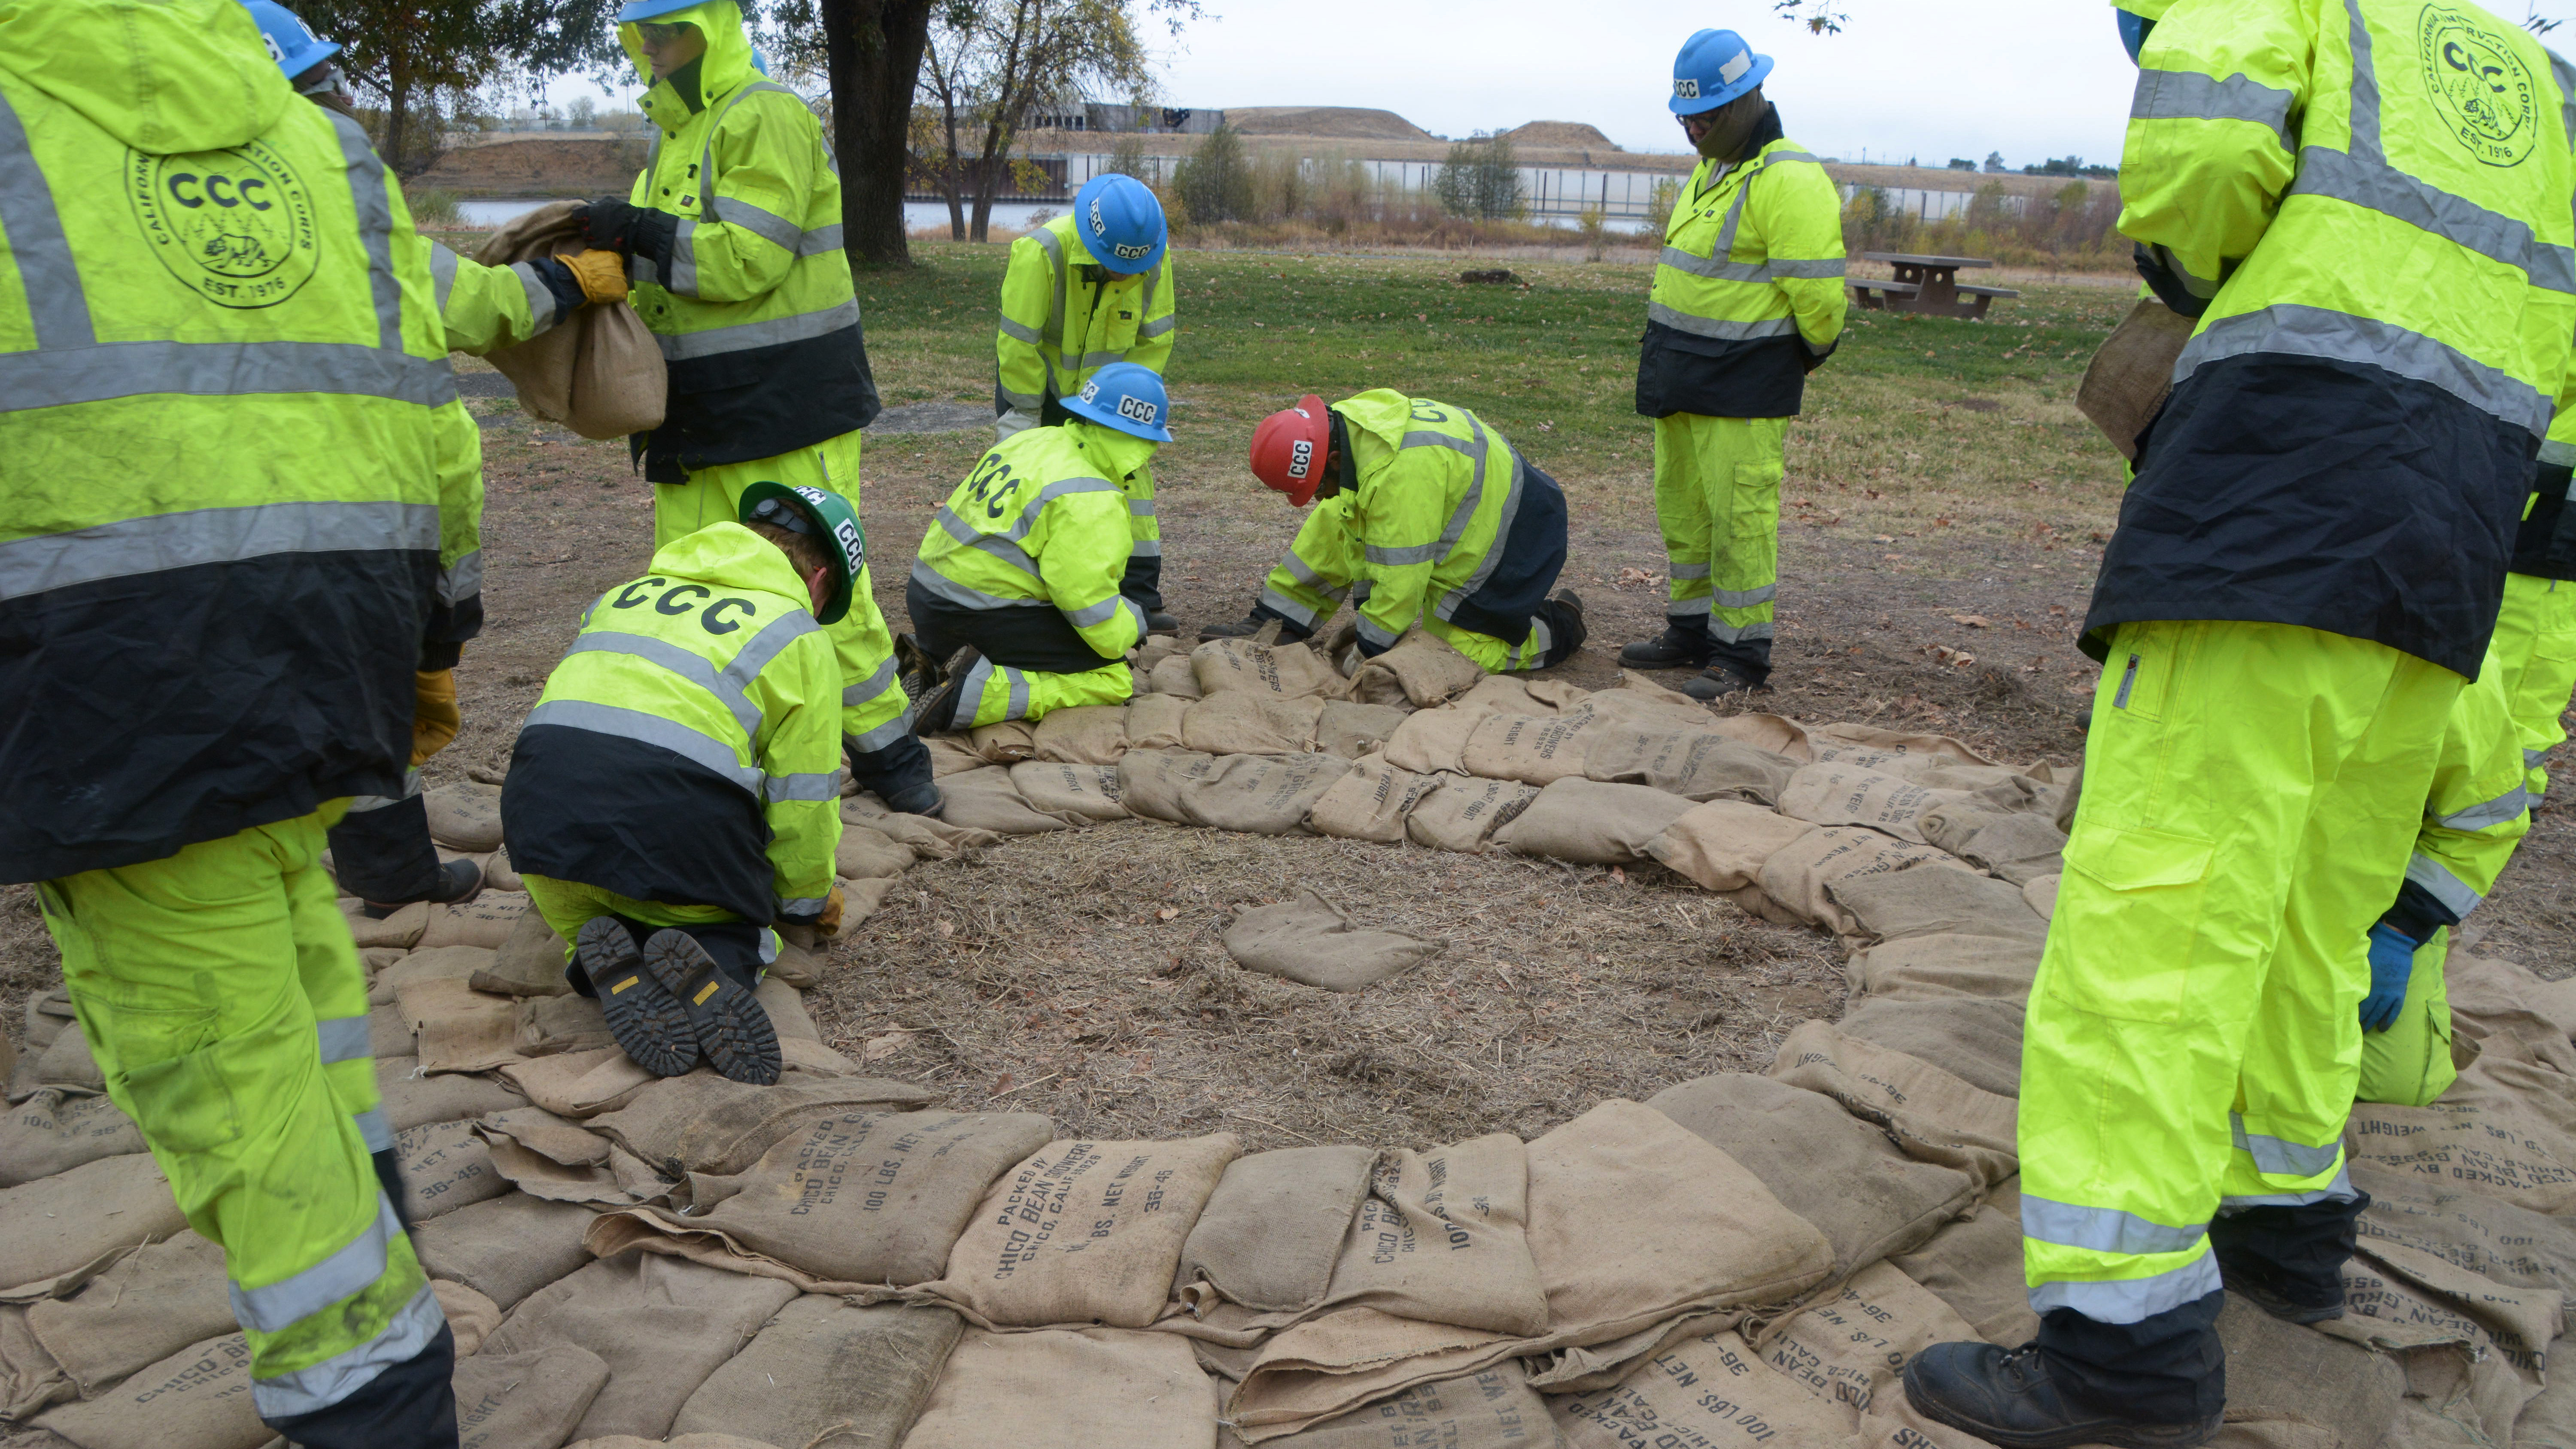 corpsmembers use sandbags to build a ring during flood training